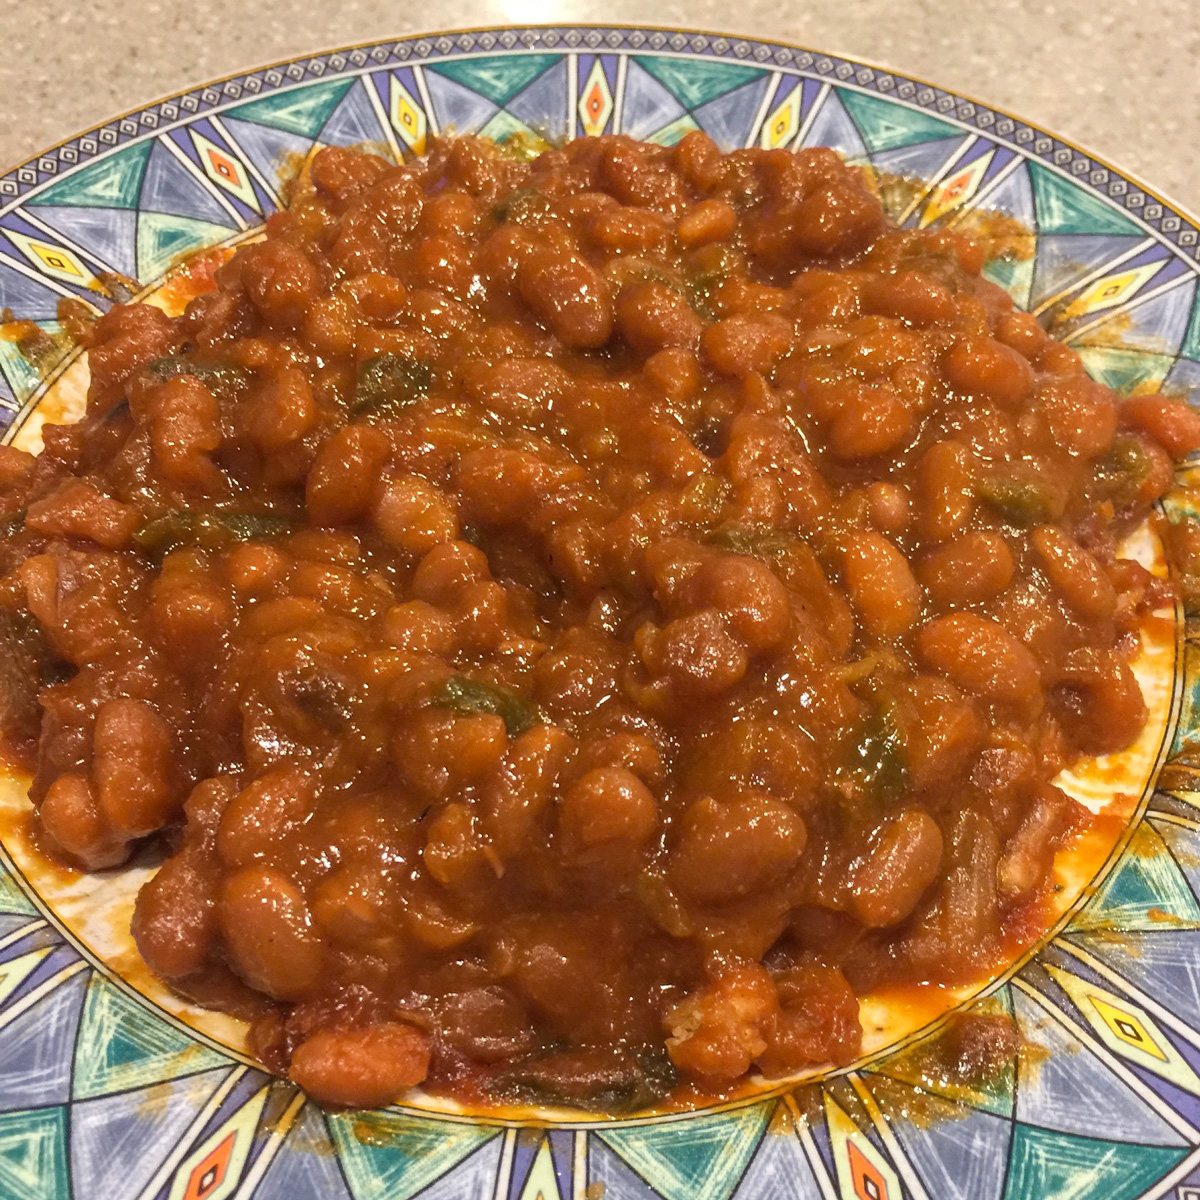 baked beans on a blue-green plate